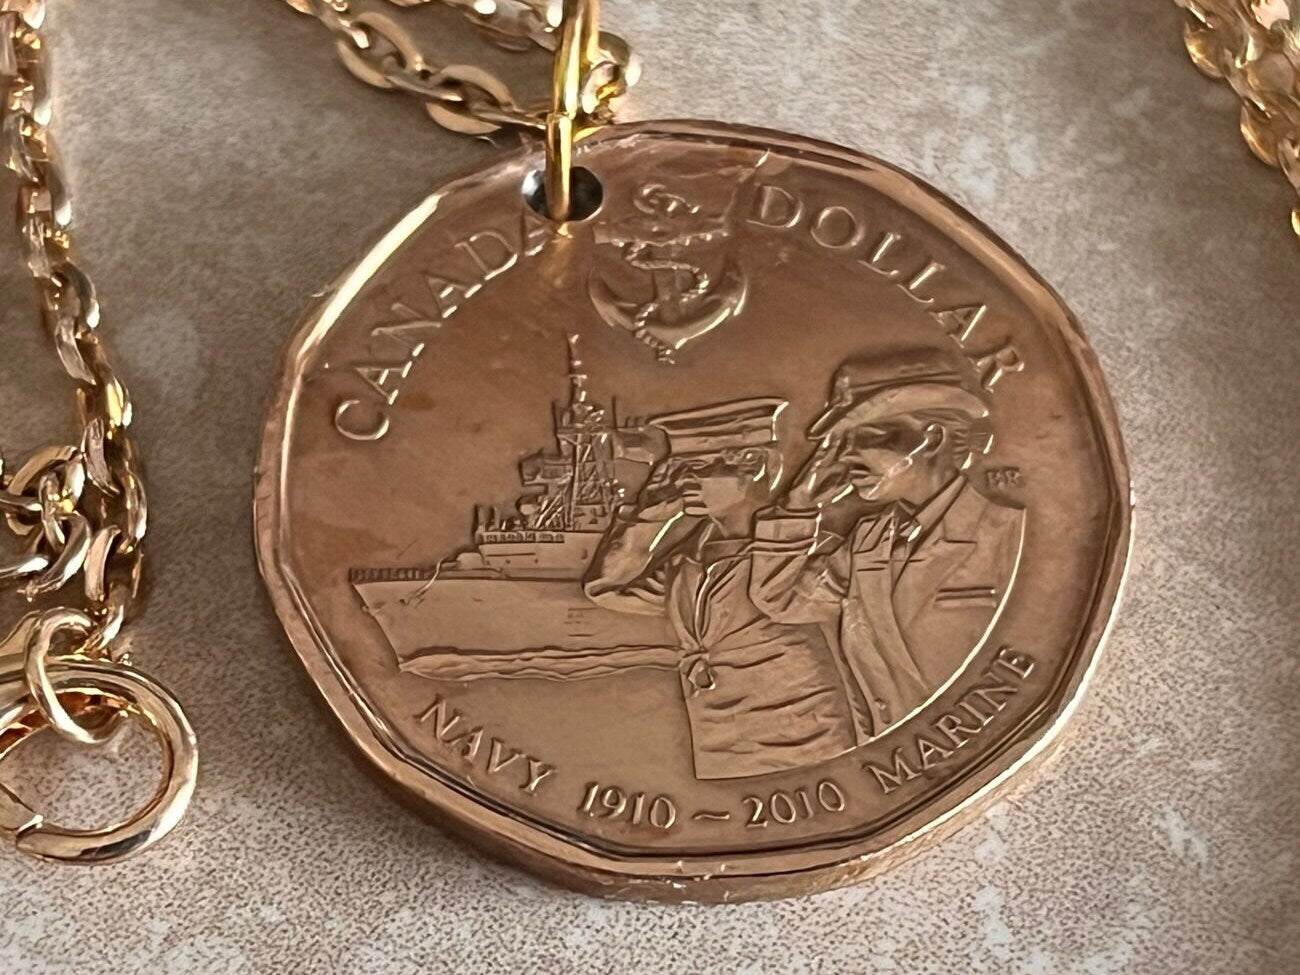 Canada Coin Necklace 2010 Navy Centennial Loon Dollar Loonie Personal Handmade Jewelry Gift Friend Charm For Him Her World Coin Collector